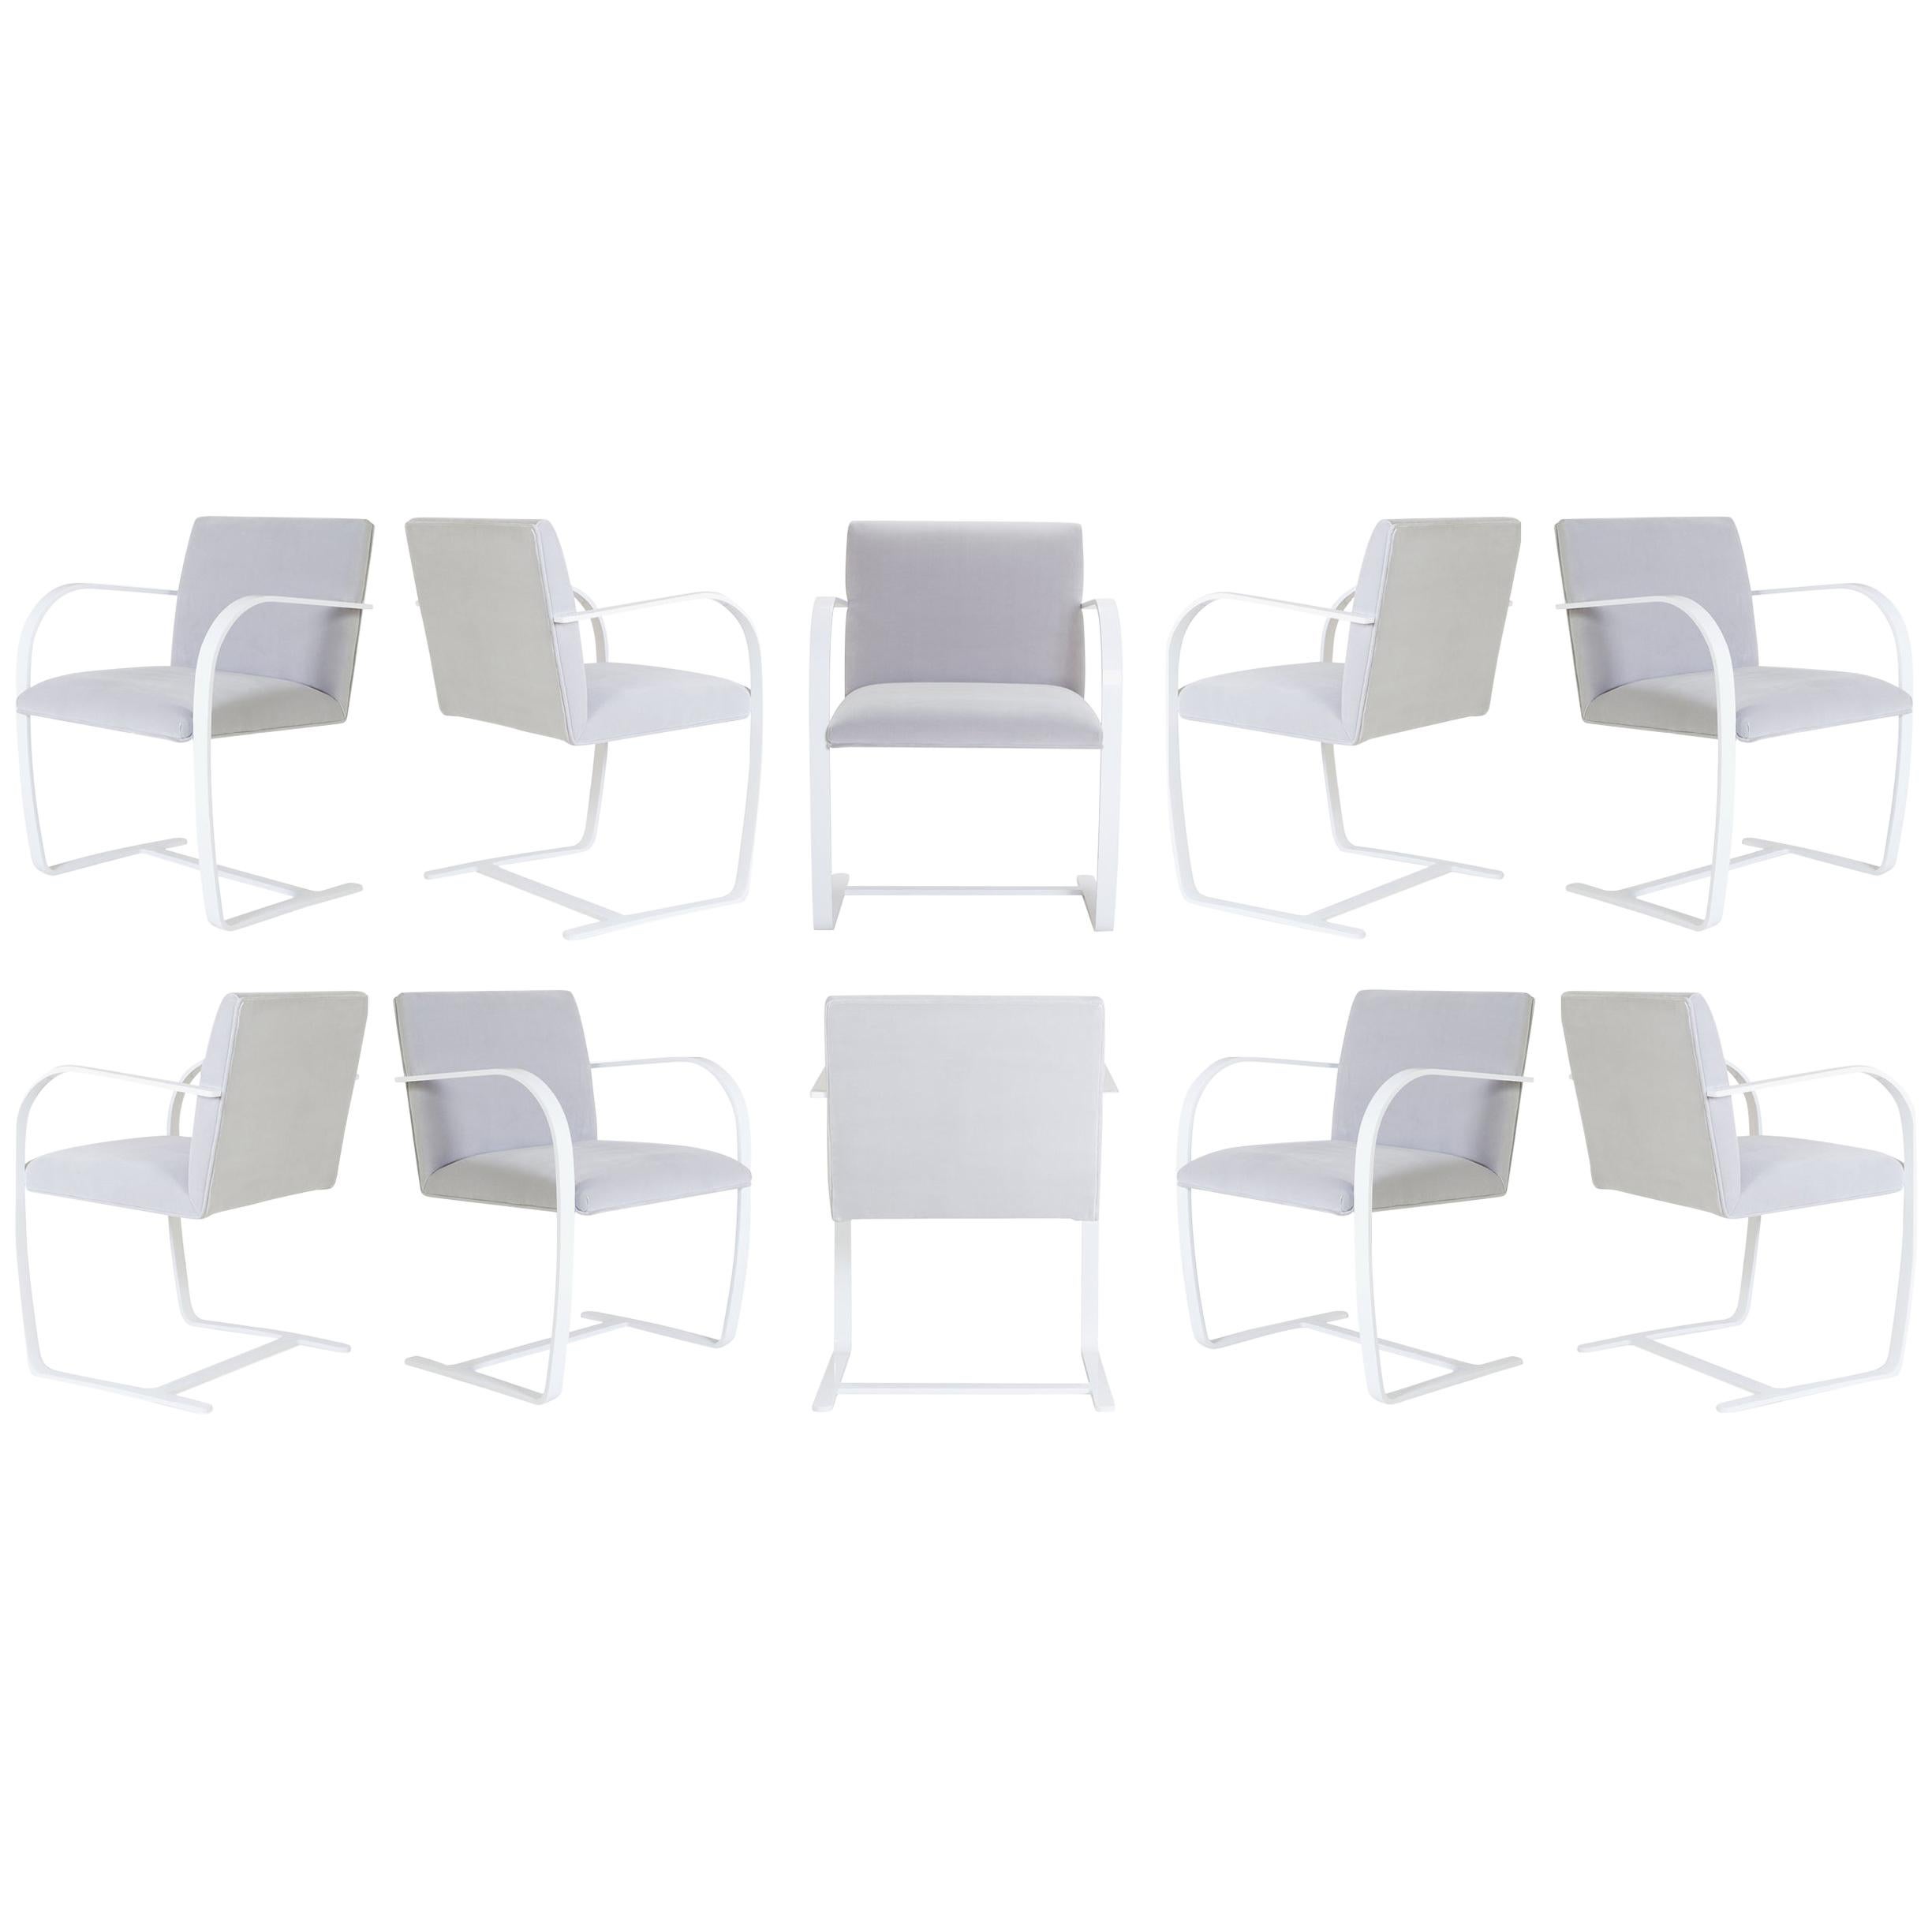 Brno Flat-Bar Chairs in Velvet, Lunar Gloss by Mies van der Rohe for Knoll, 10 For Sale